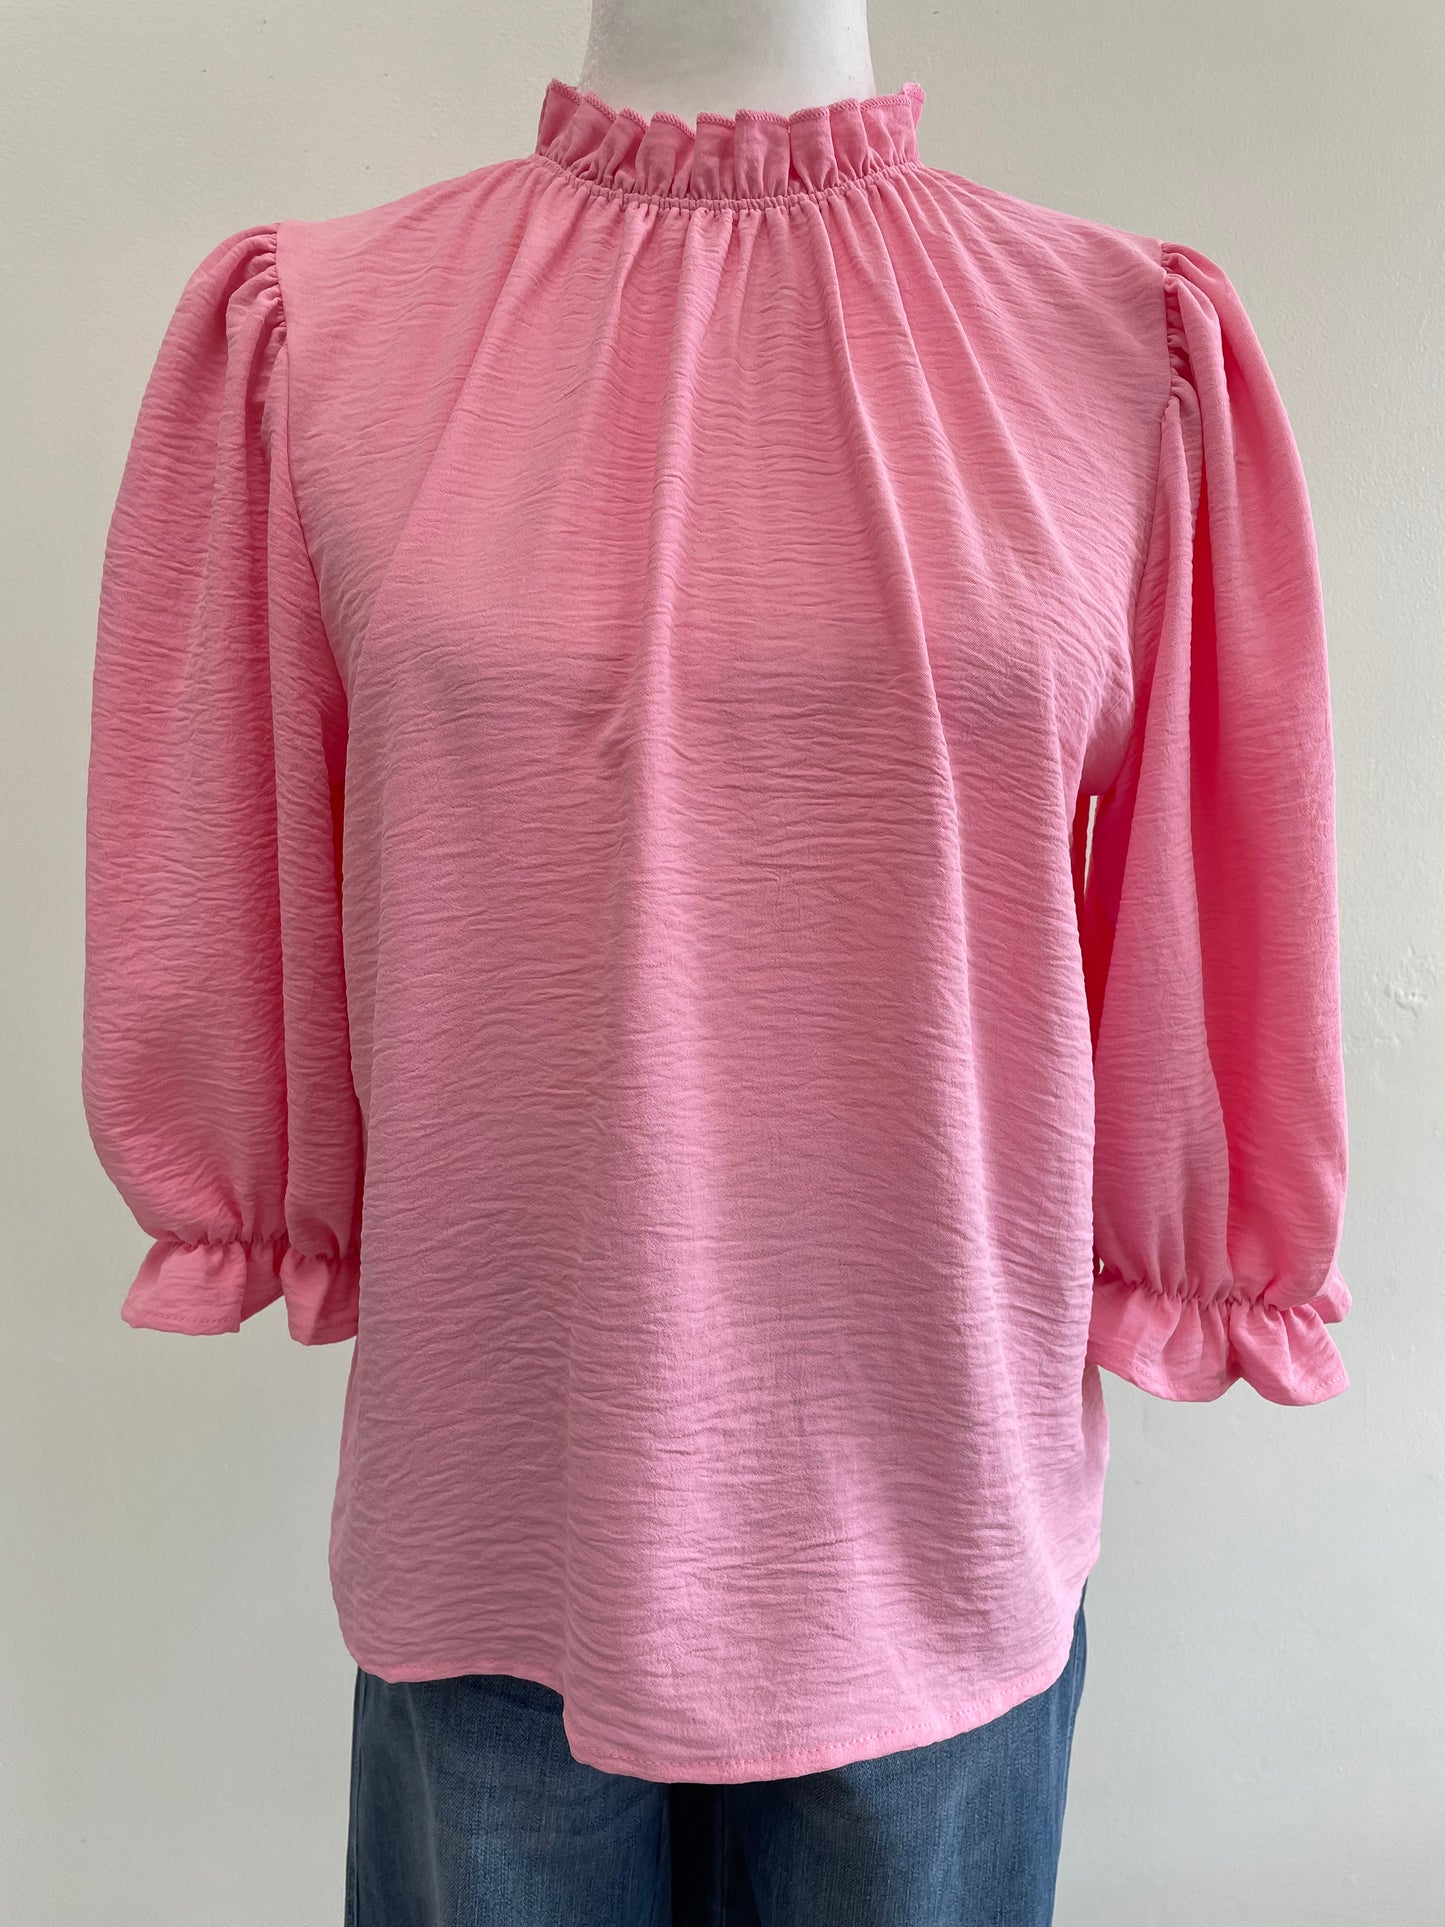 Back to Business Top, Pink